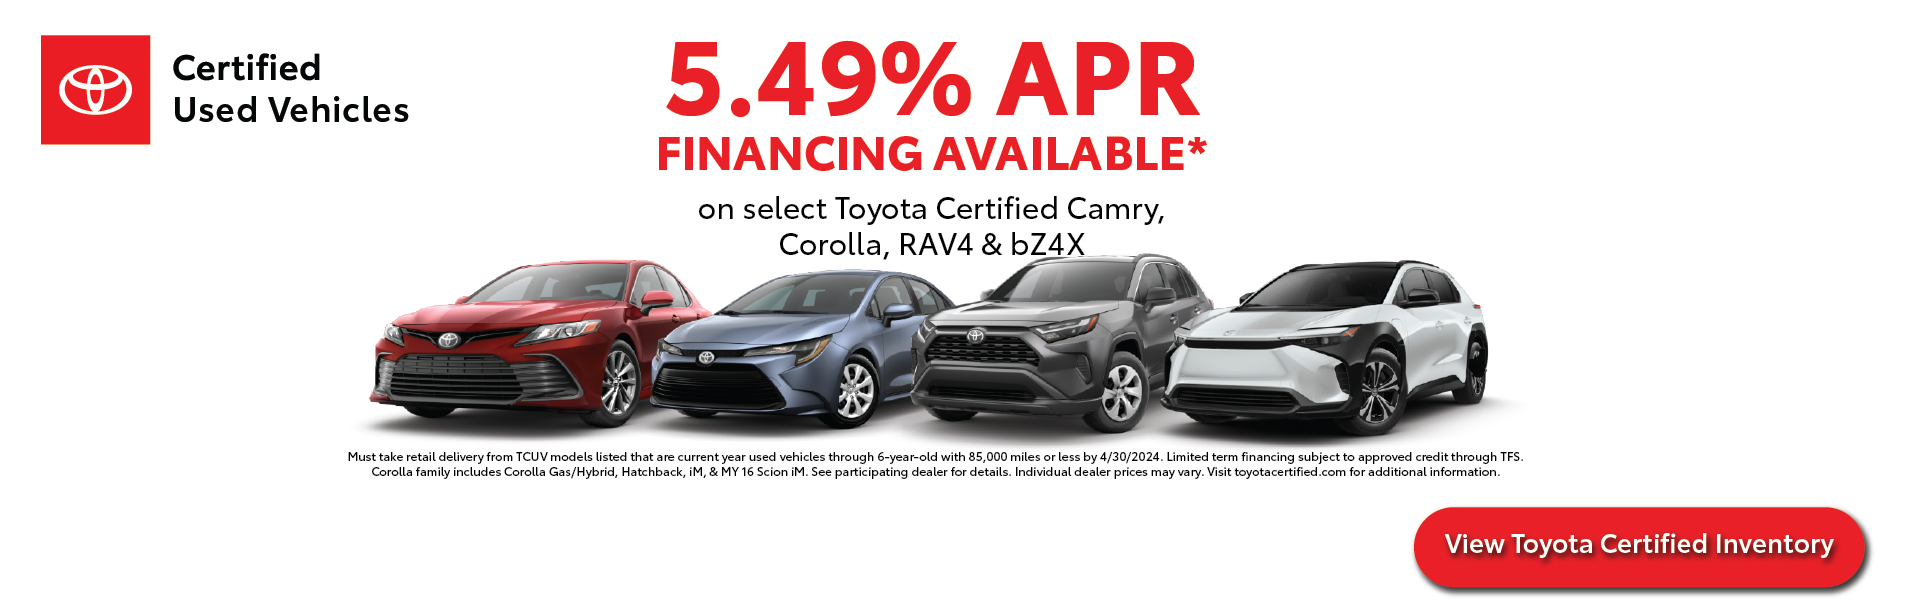 Toyota Certified Used Vehicle Offer | Andy Mohr Toyota in Avon IN